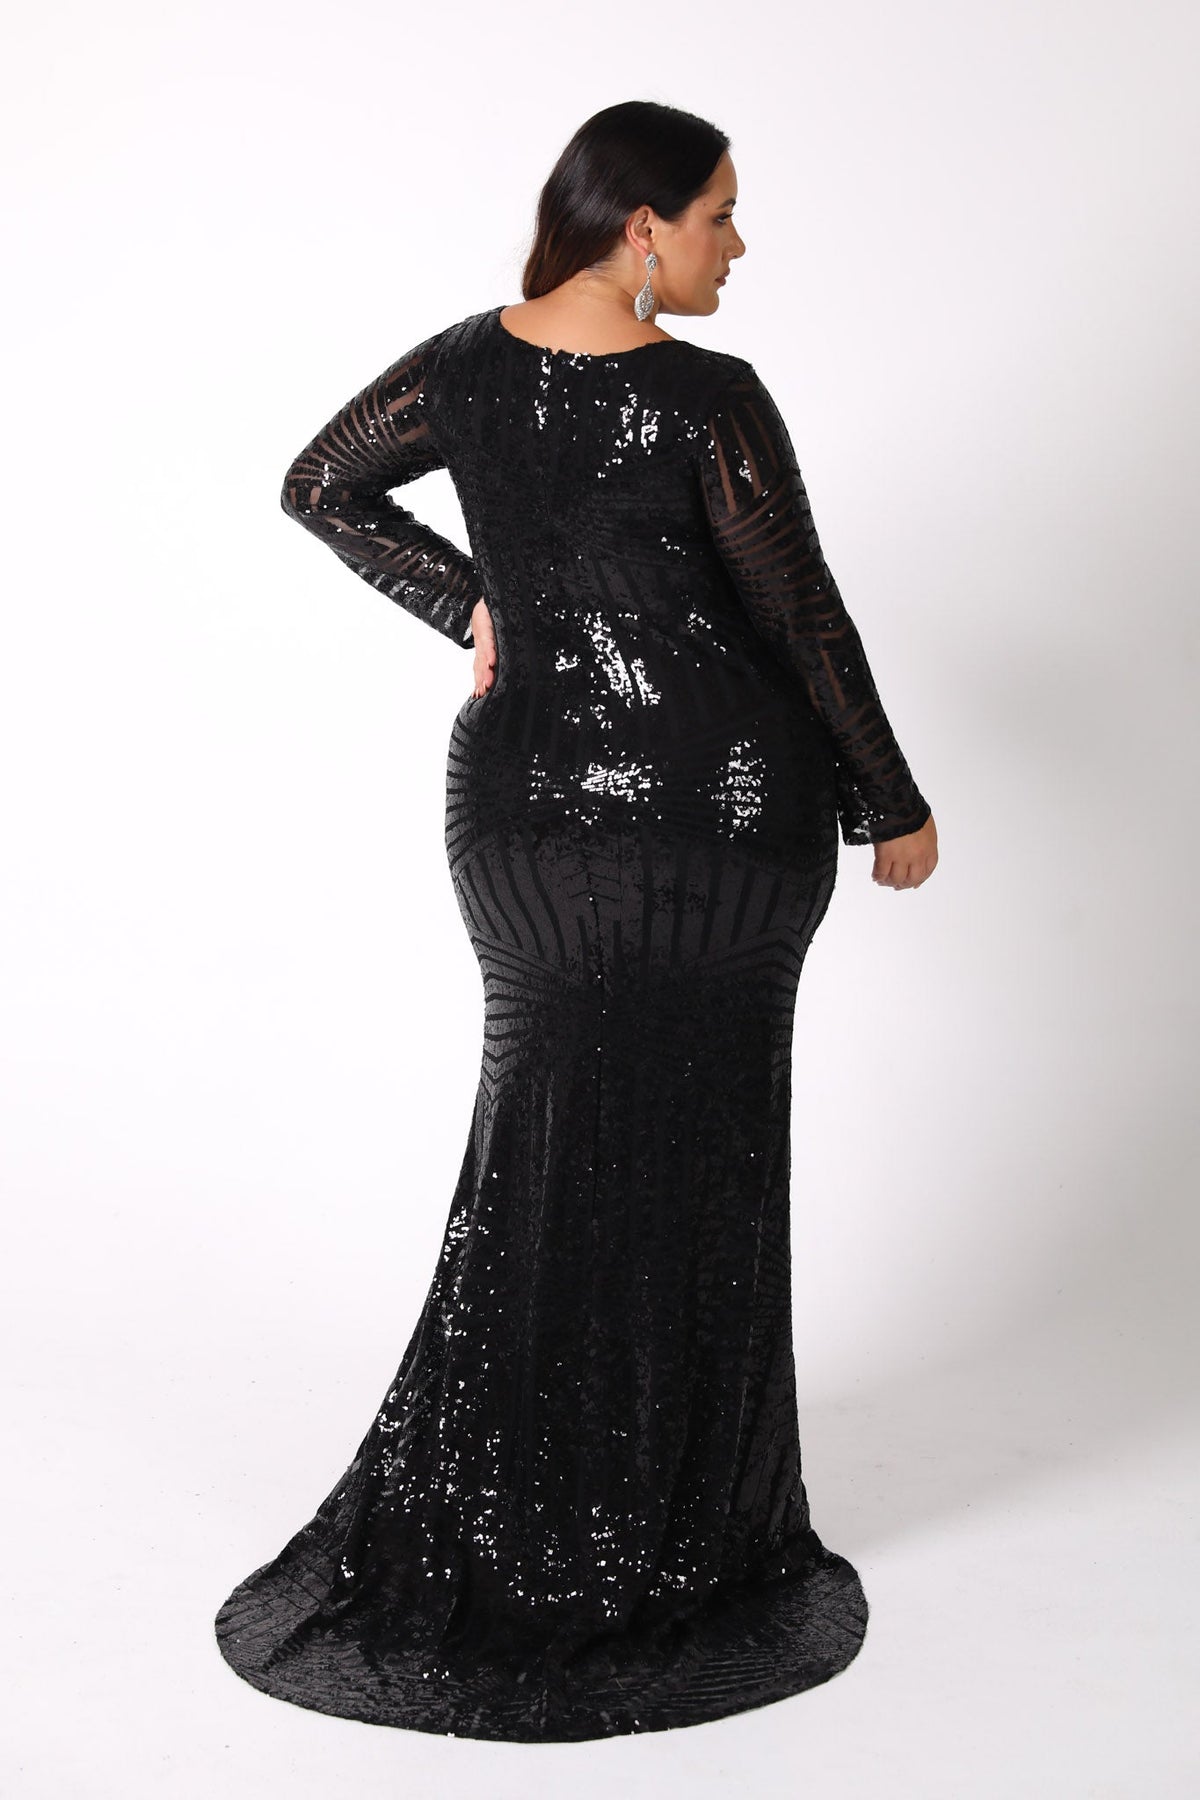 Back Image of Side Image of Plus Size Closed Back Design of Plus Size Black Sequin Floor Length Fitted Evening Gown with Round Neckline, Mermaid Silhouette and Long Sleeves